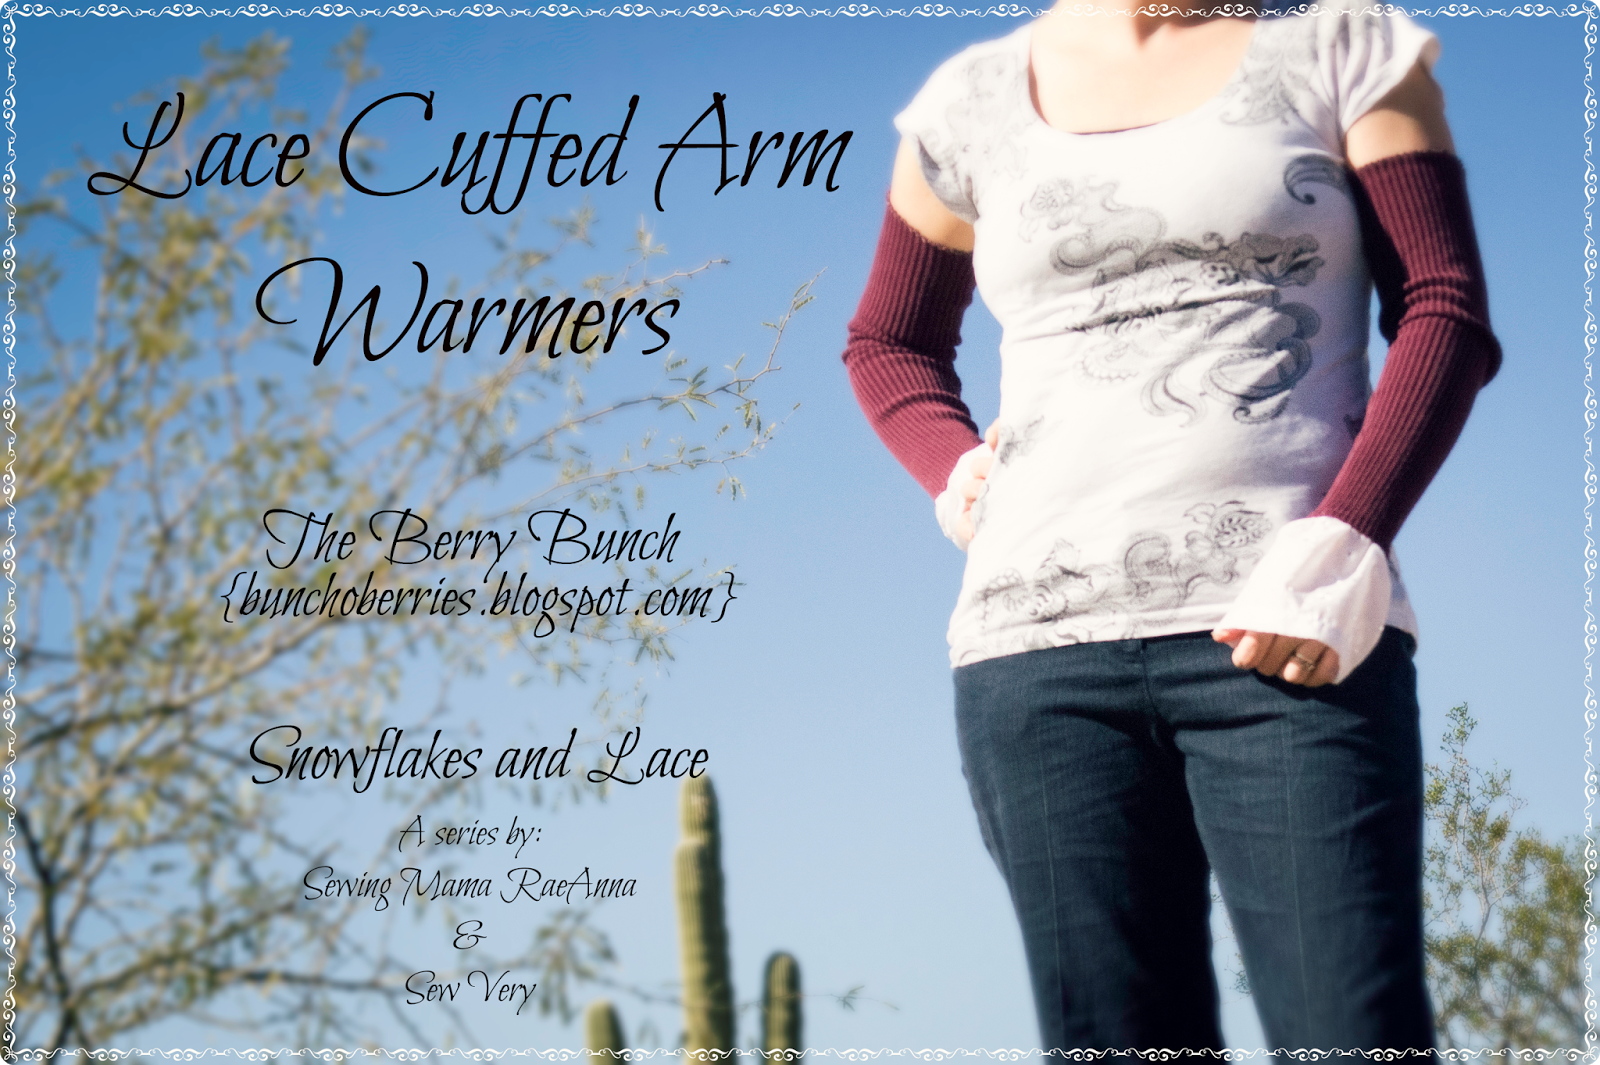 The Berry Bunch: Lace Cuffed Arm Warmers {Snowflakes and Lace}